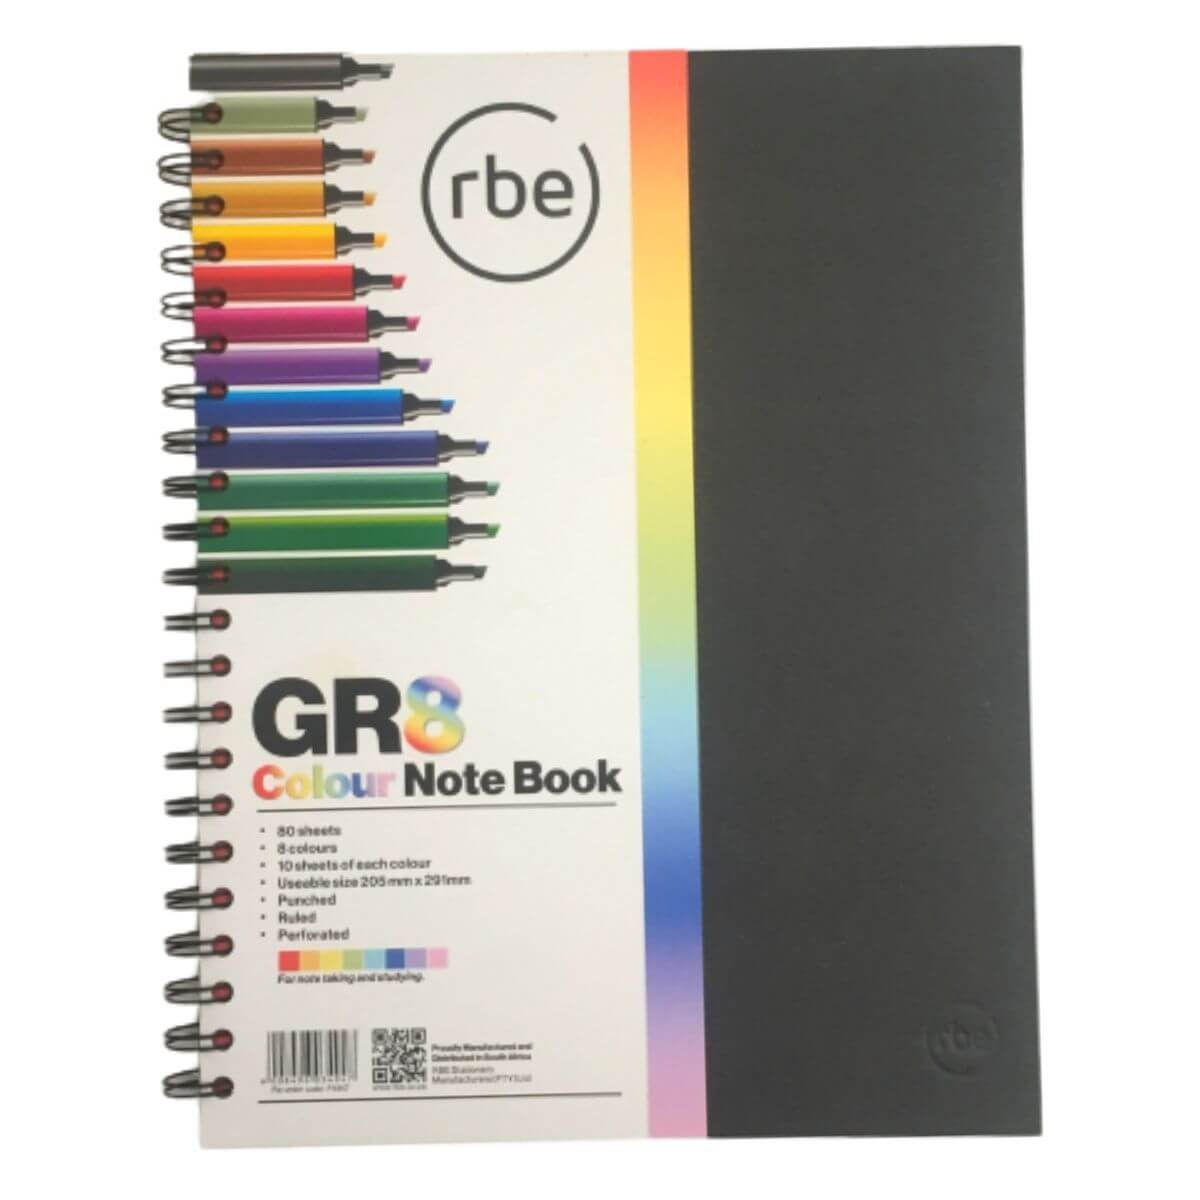 GR8 Colour Notebook with Perforated & Punched Pages